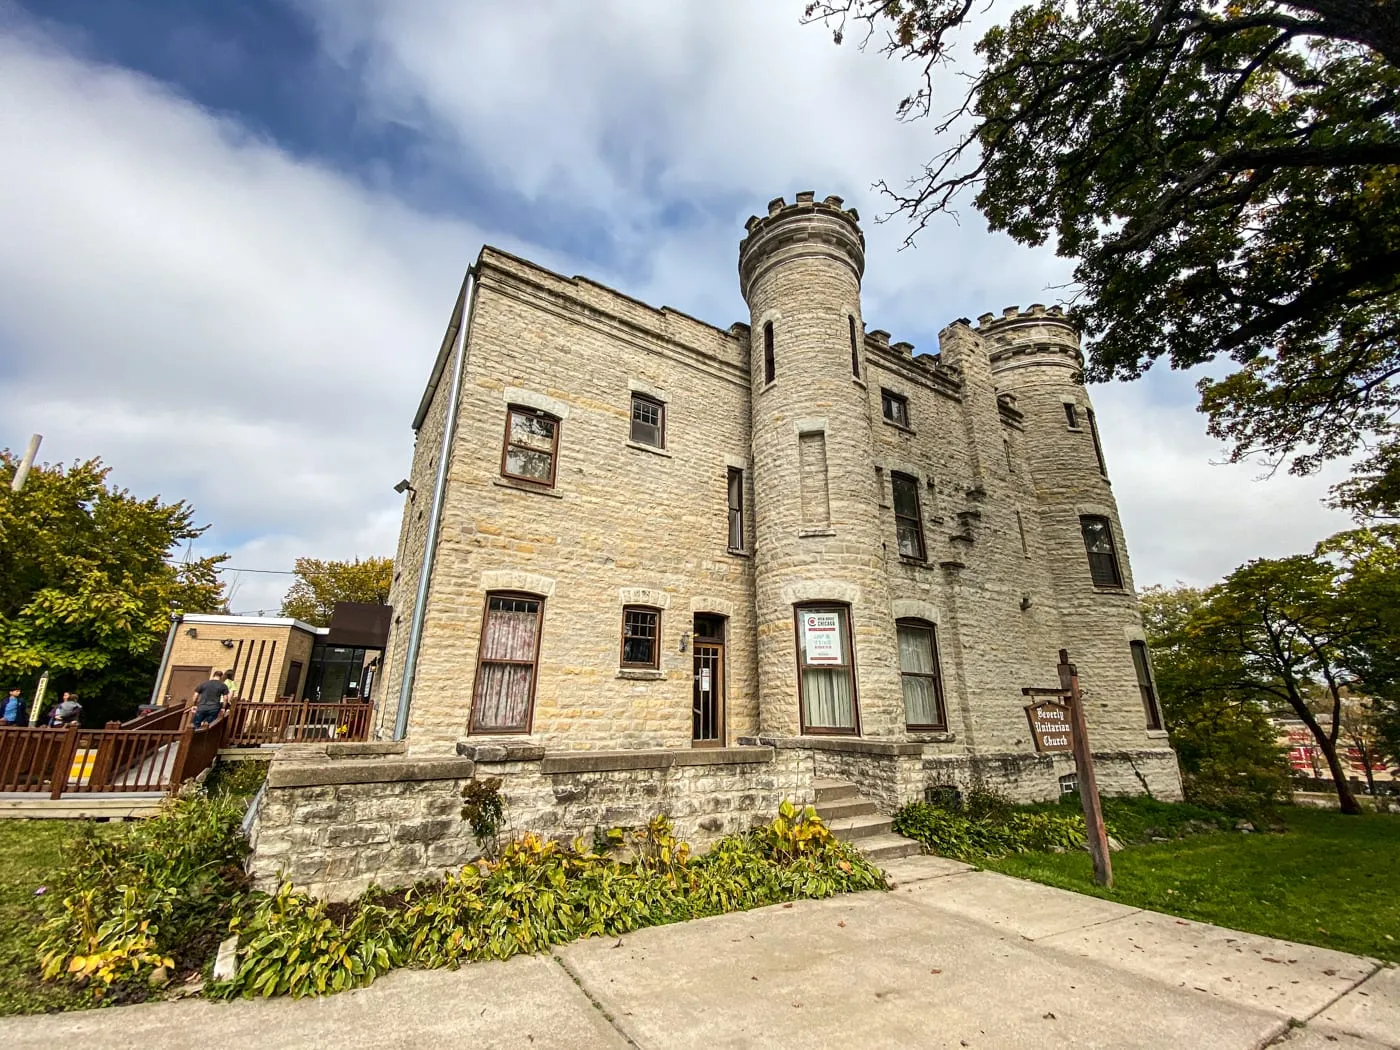 The Givins Castle in Chicago, Illinois. The only castle in Chicago. Open House Chicago.